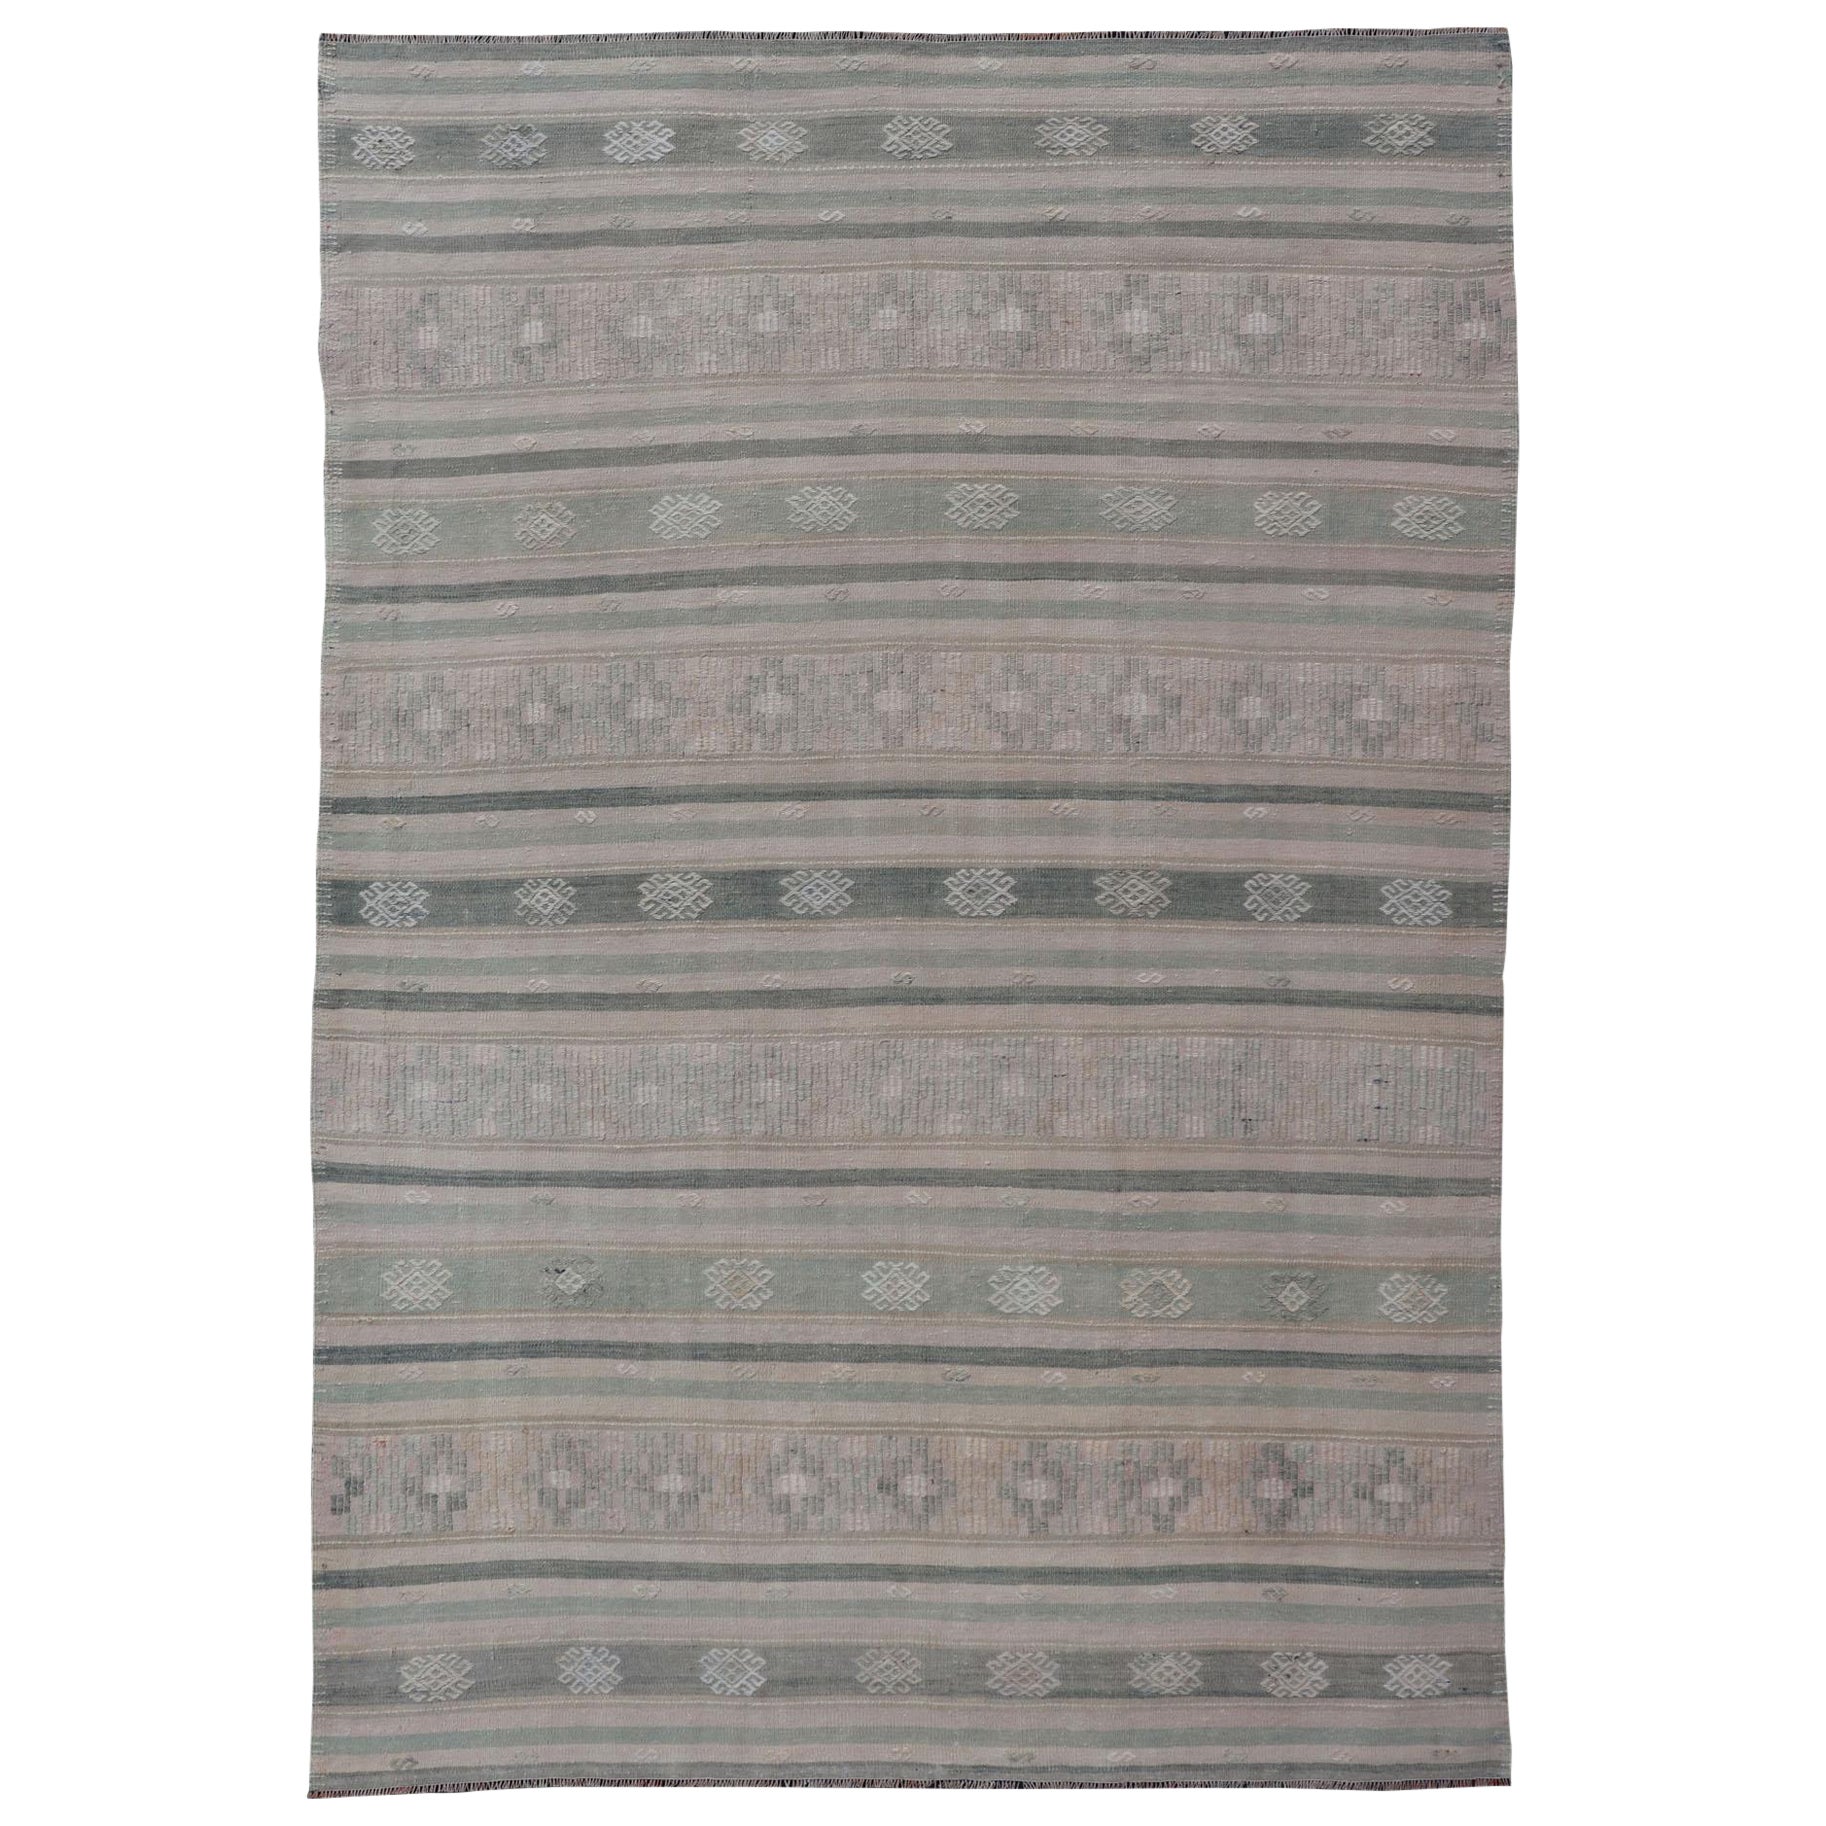 Flat-Weave Hand Woven Kilim with Embroideries in Taupe, Tan, Blue and Gray For Sale